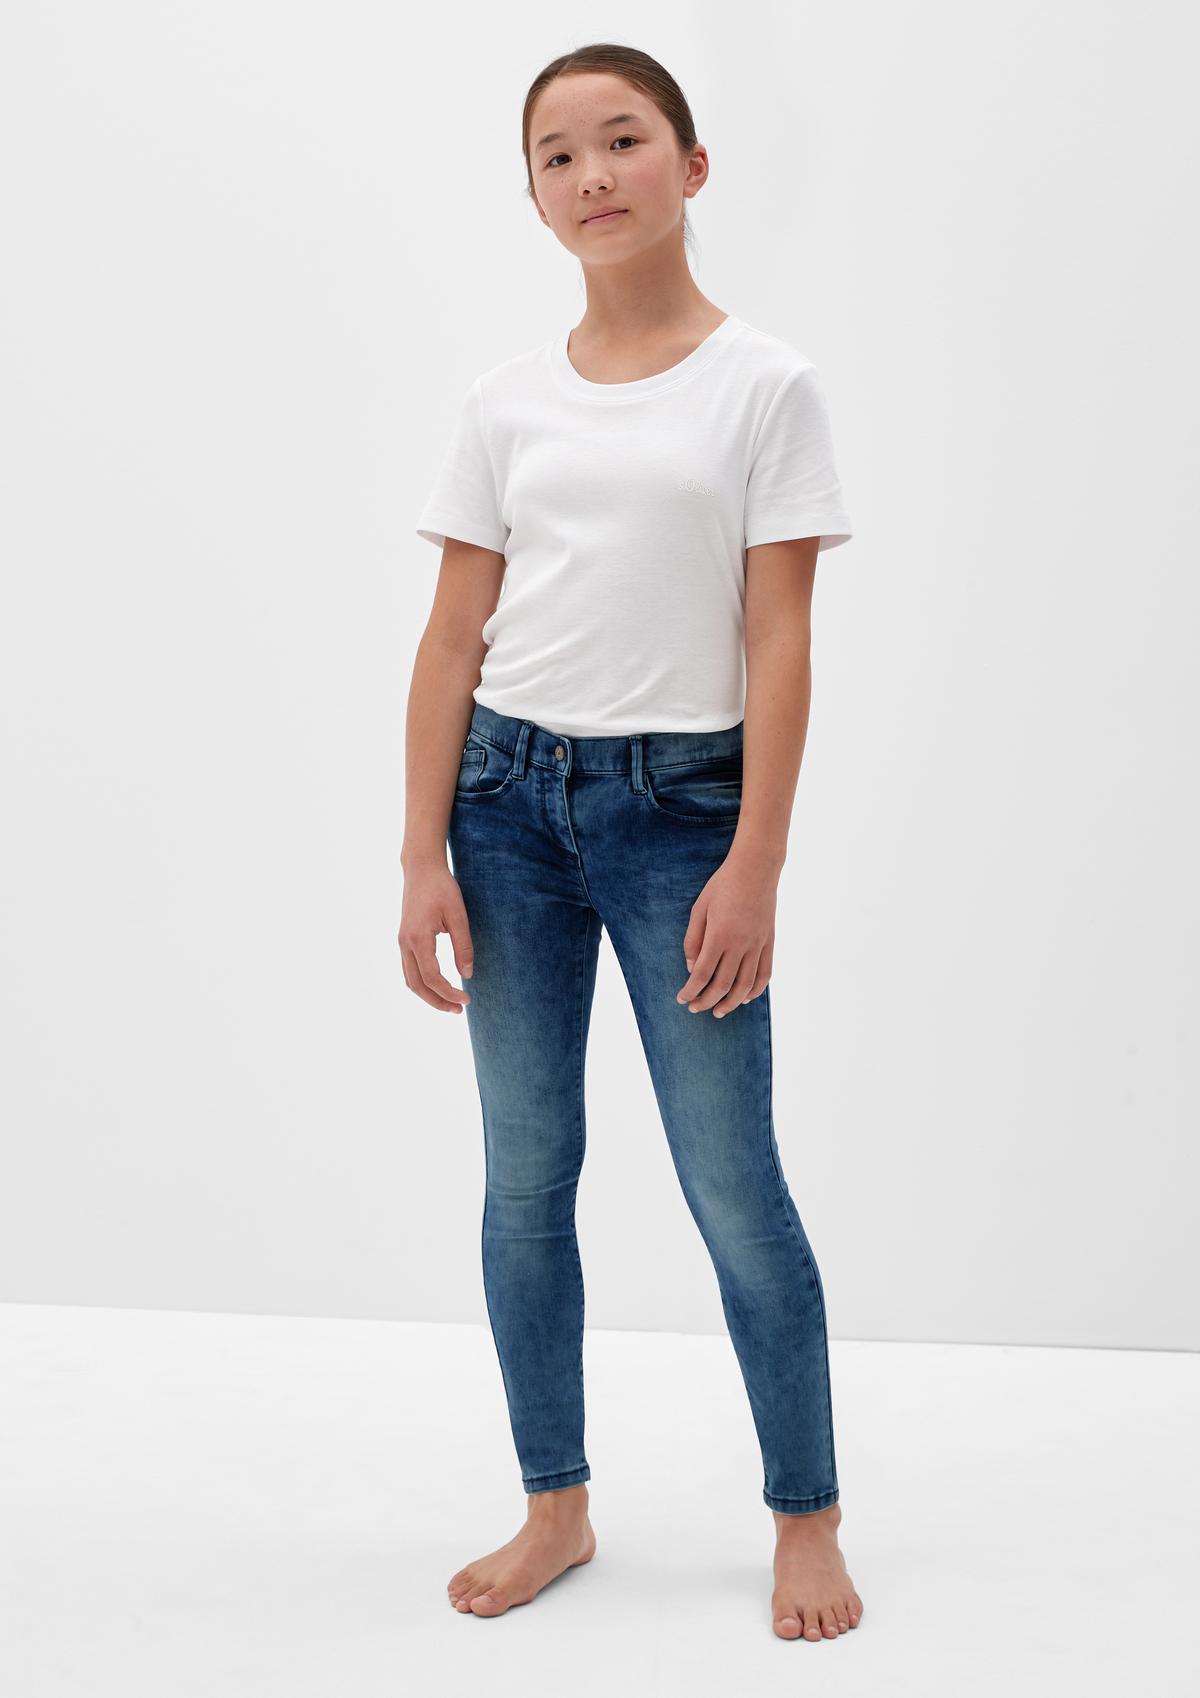 Shop jeans for girls teens and online